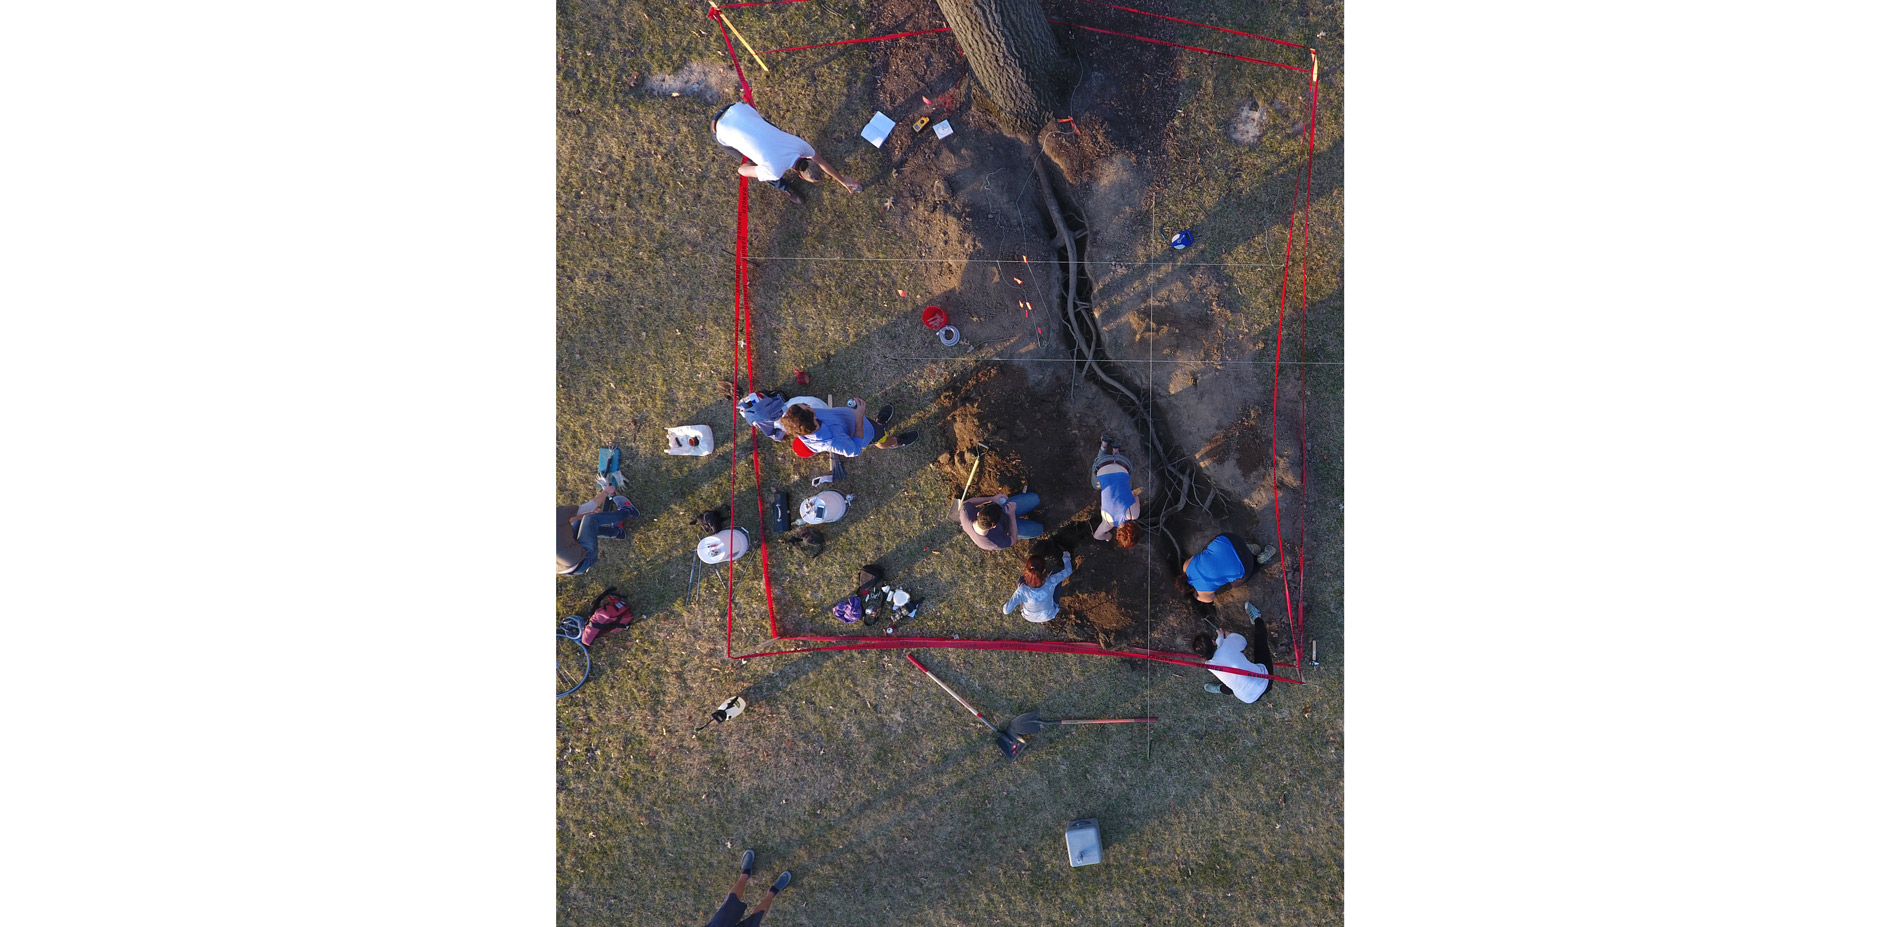 The One Tree project took the territory of the tree as its classroom. Our explorations uncovered a previously unseen domain of root extents, microbial…